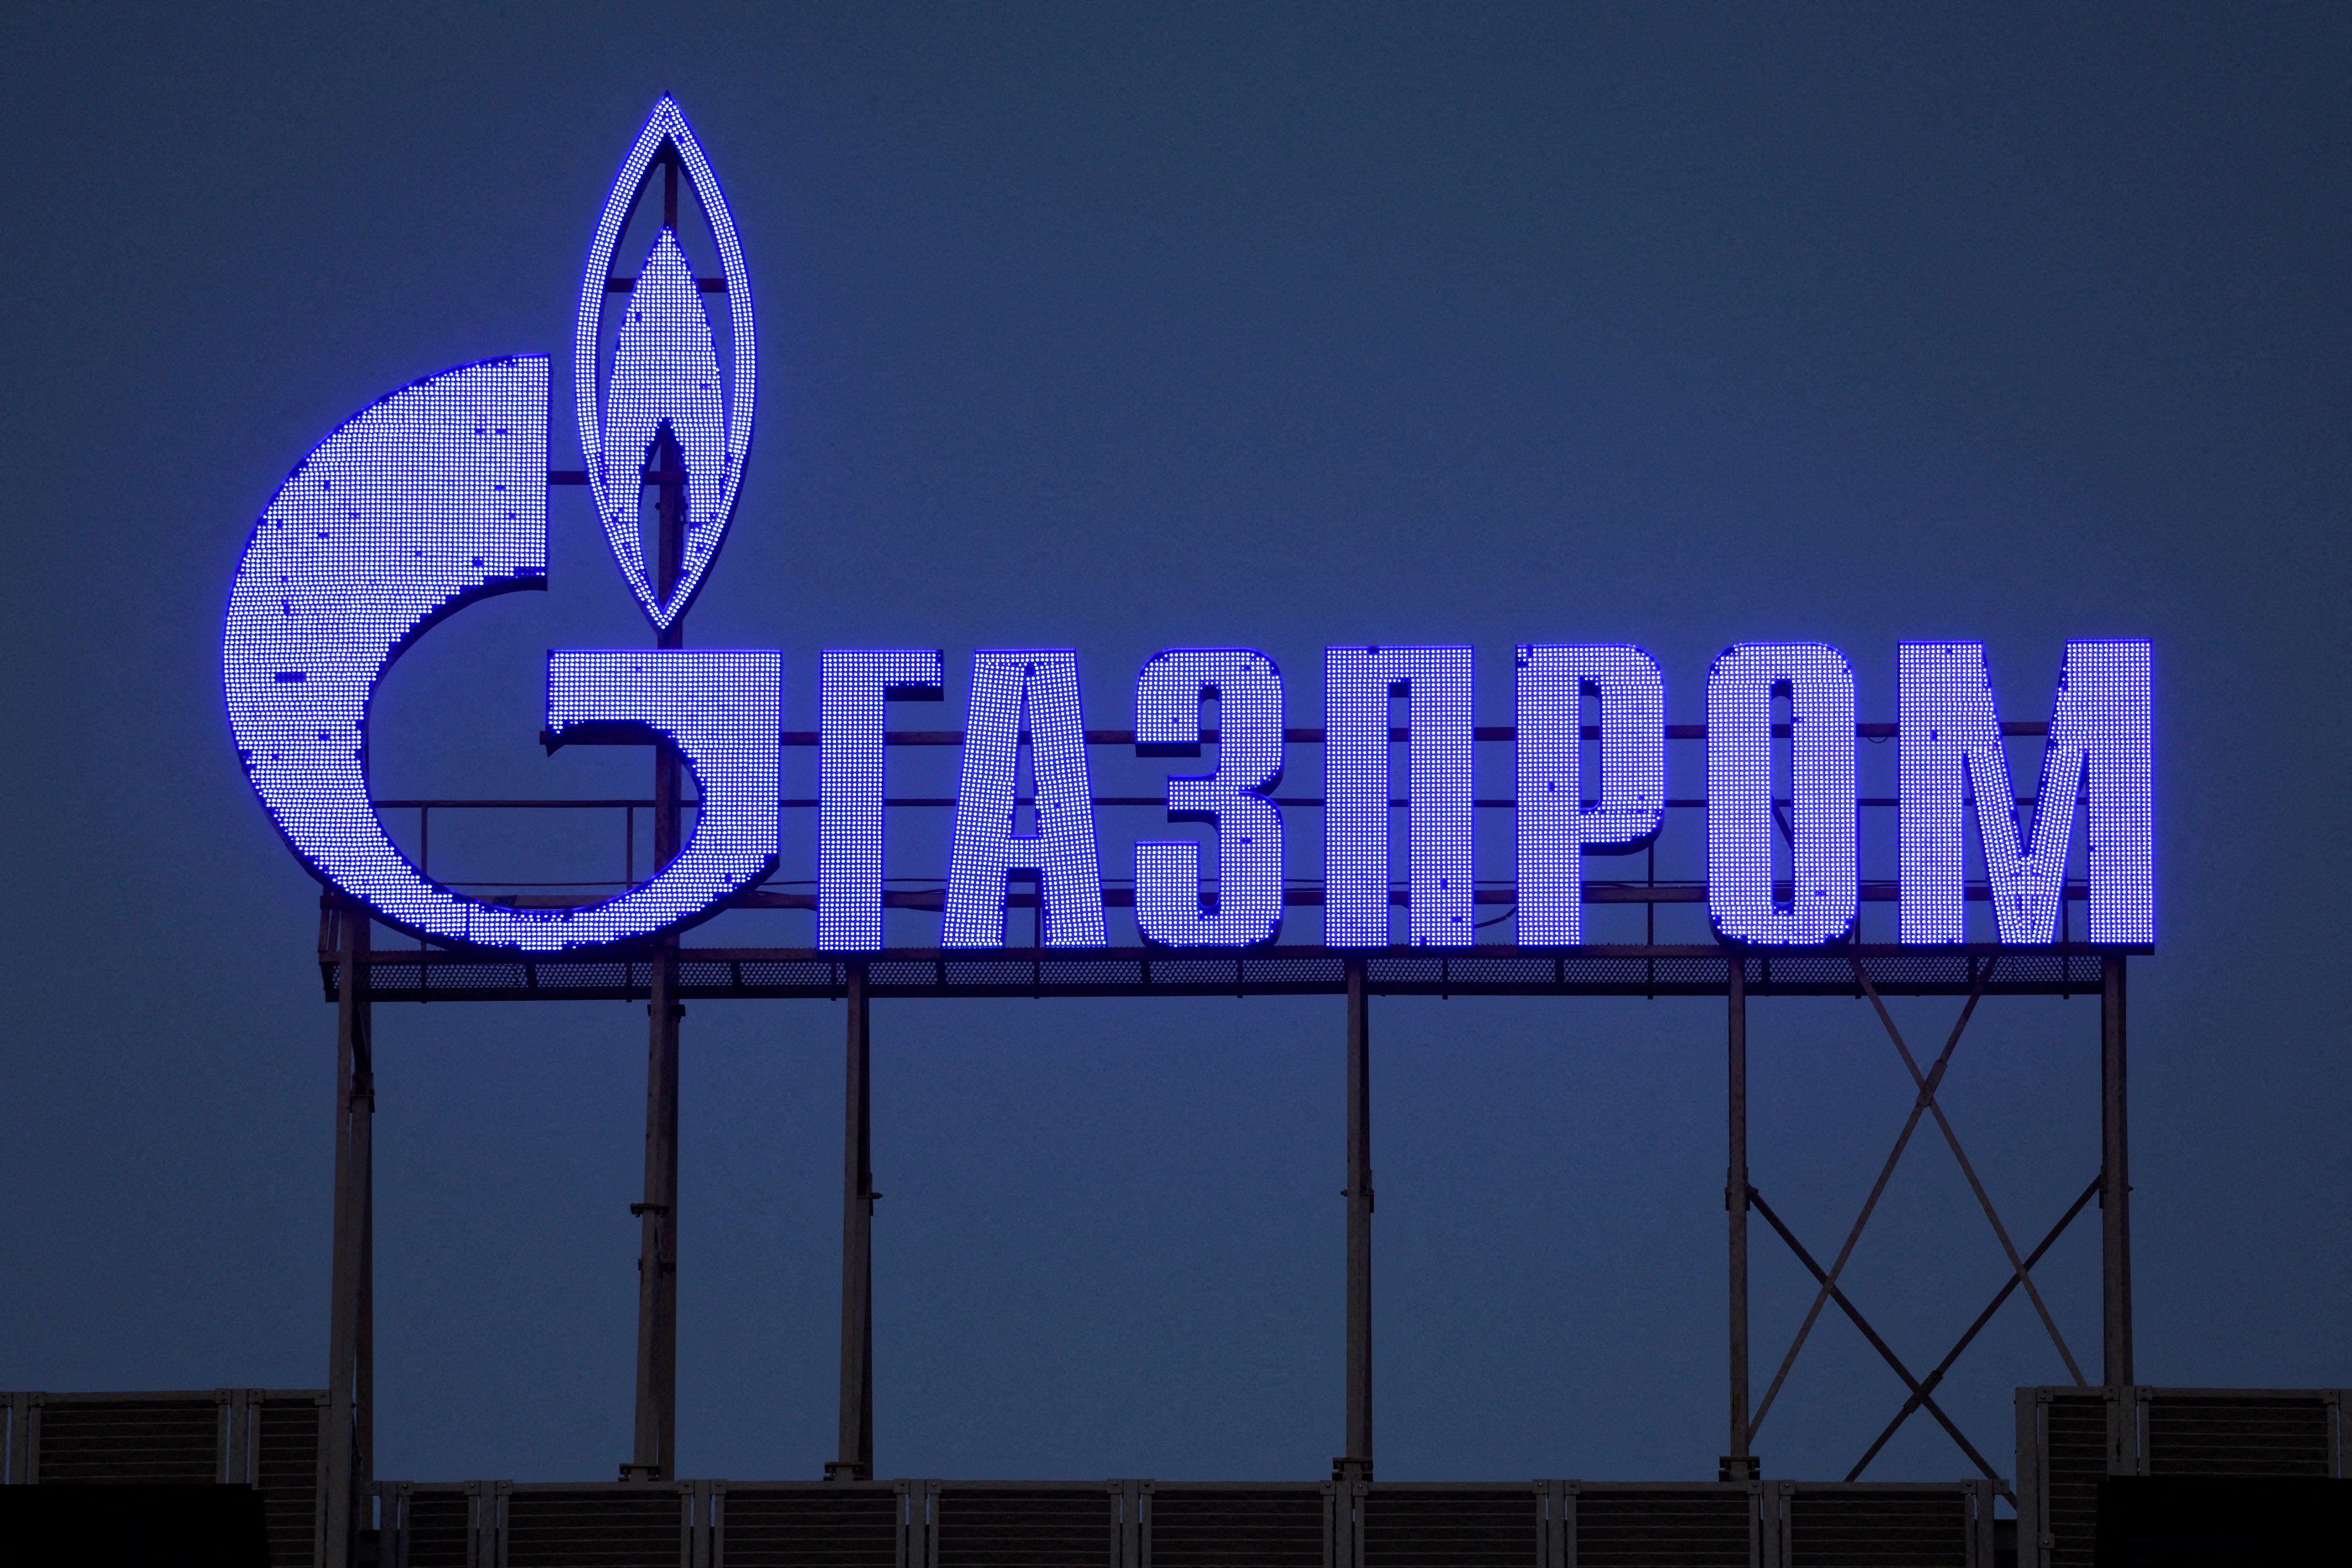 The logo of Gazprom is seen on the facade of a business centre in Saint Petersburg, Russia